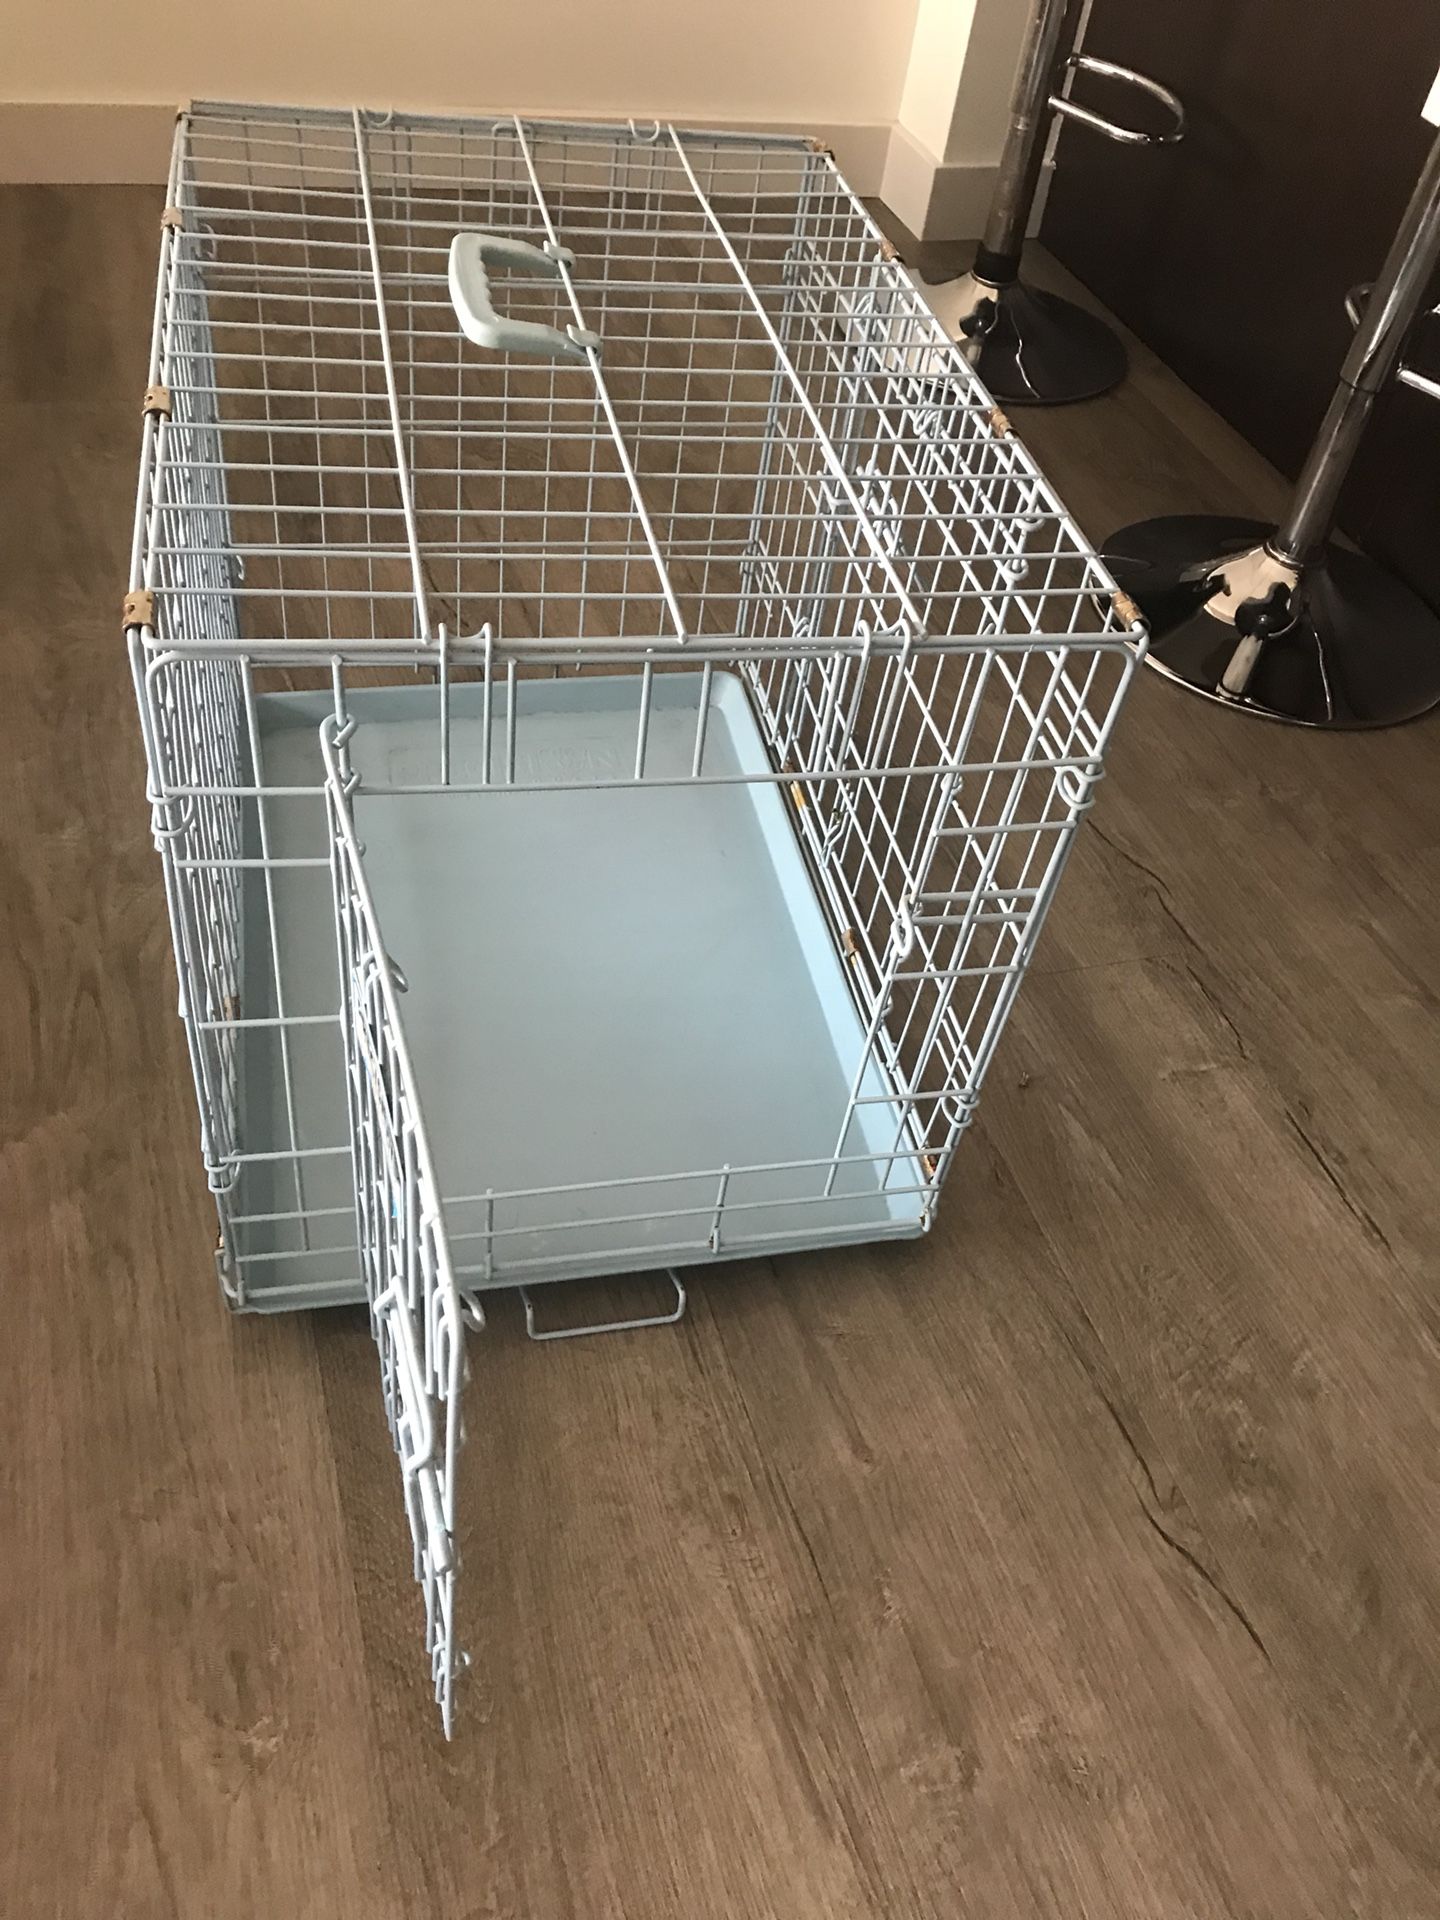 Small cage for dogs